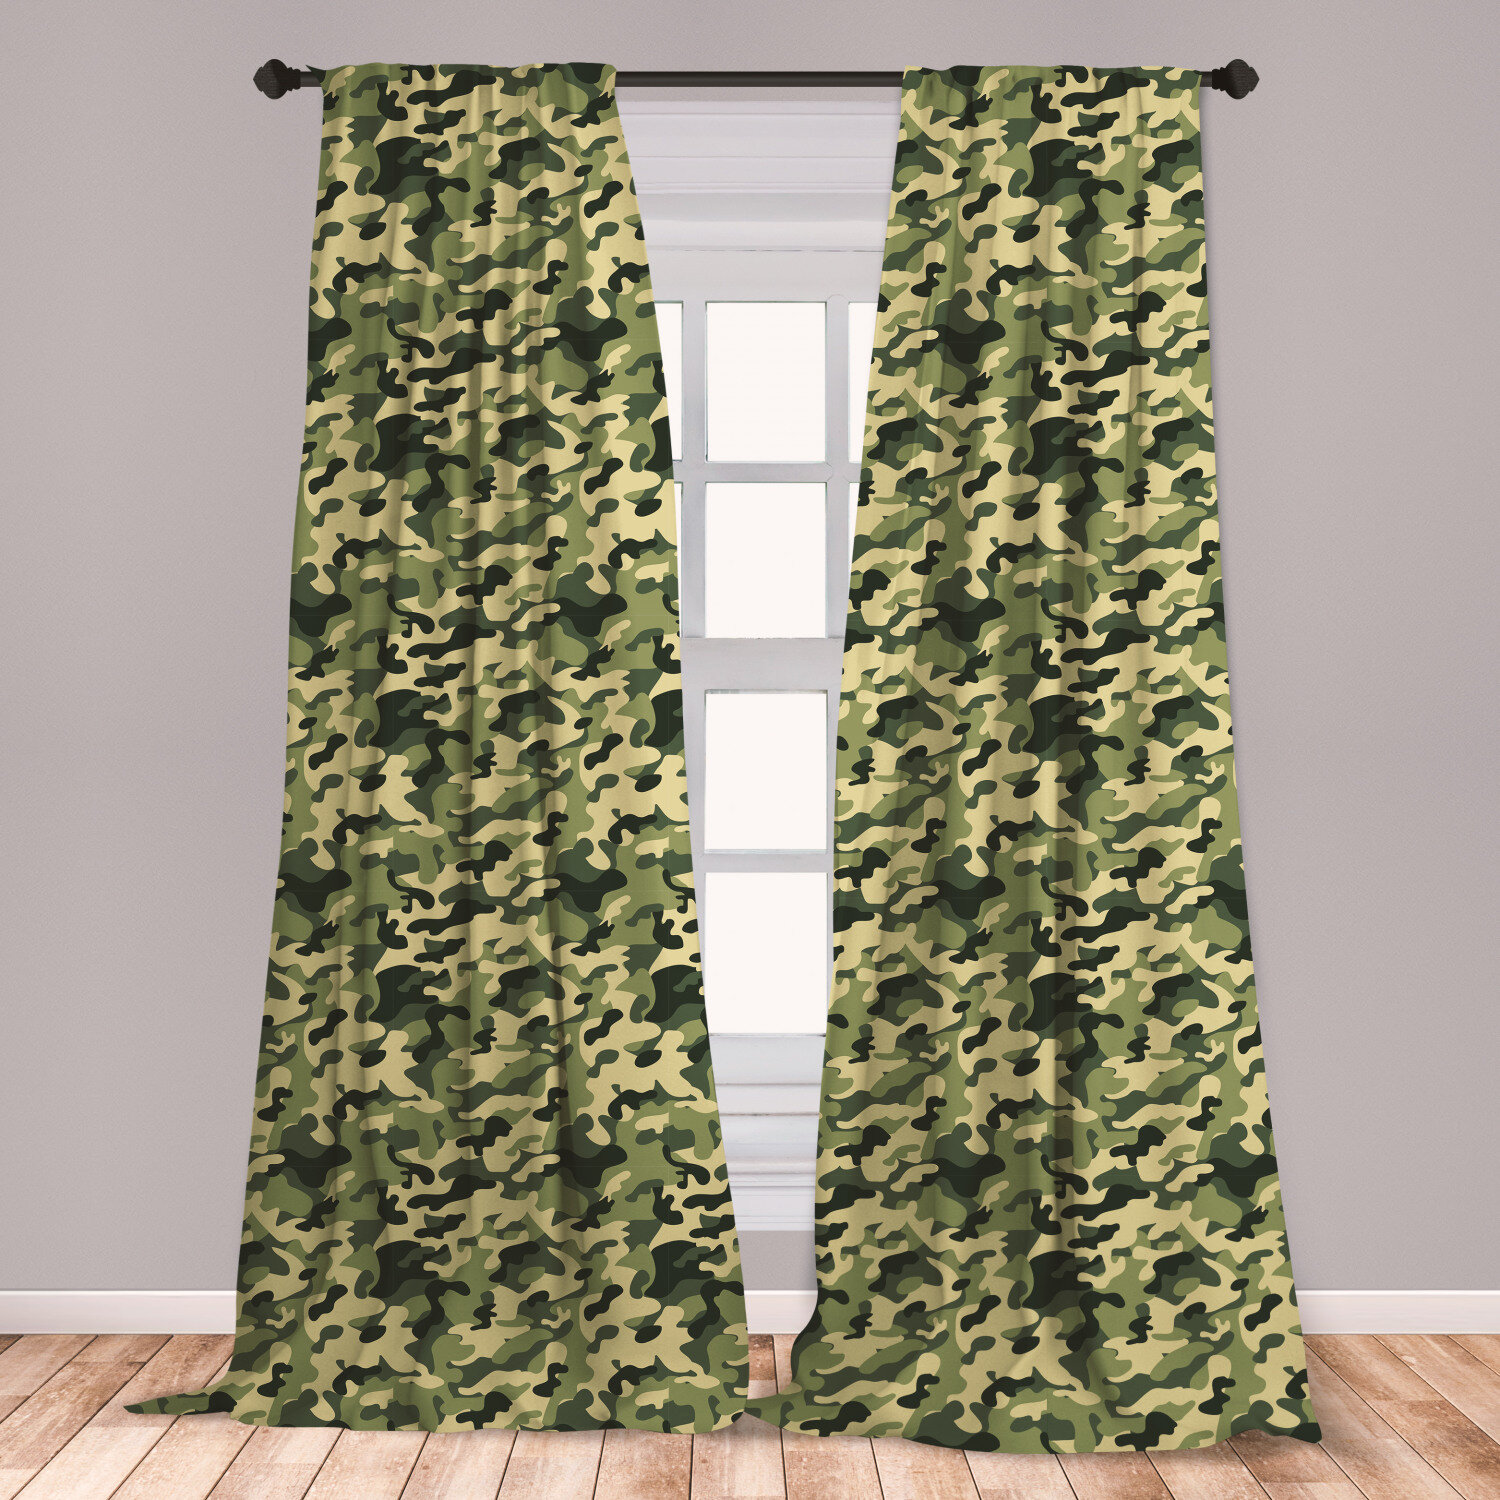 East Urban Home Ambesonne Camouflage Curtains